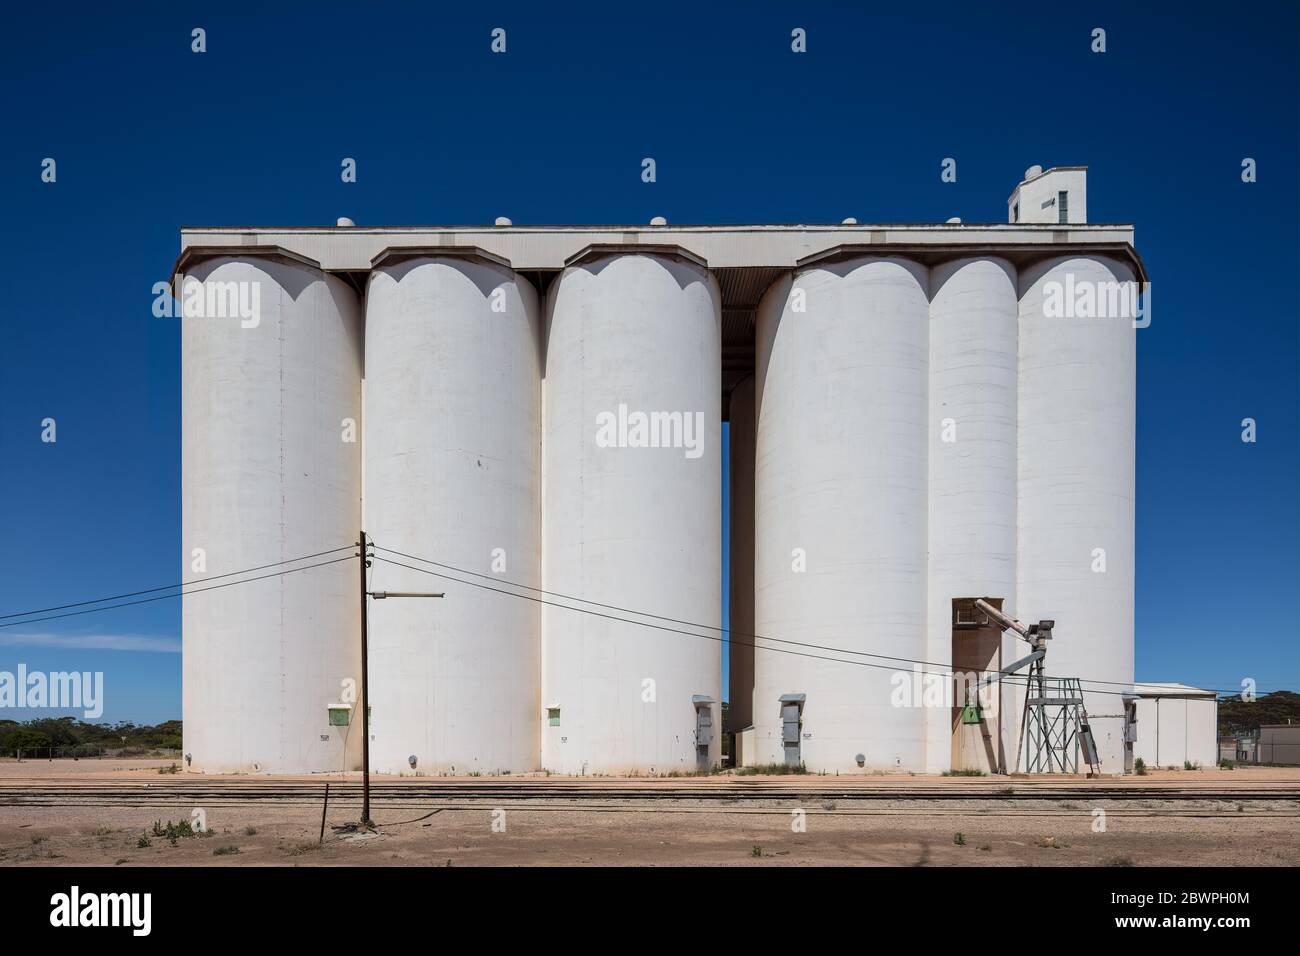 Grain silos situated in the wheat belt region of South Australia Stock Photo